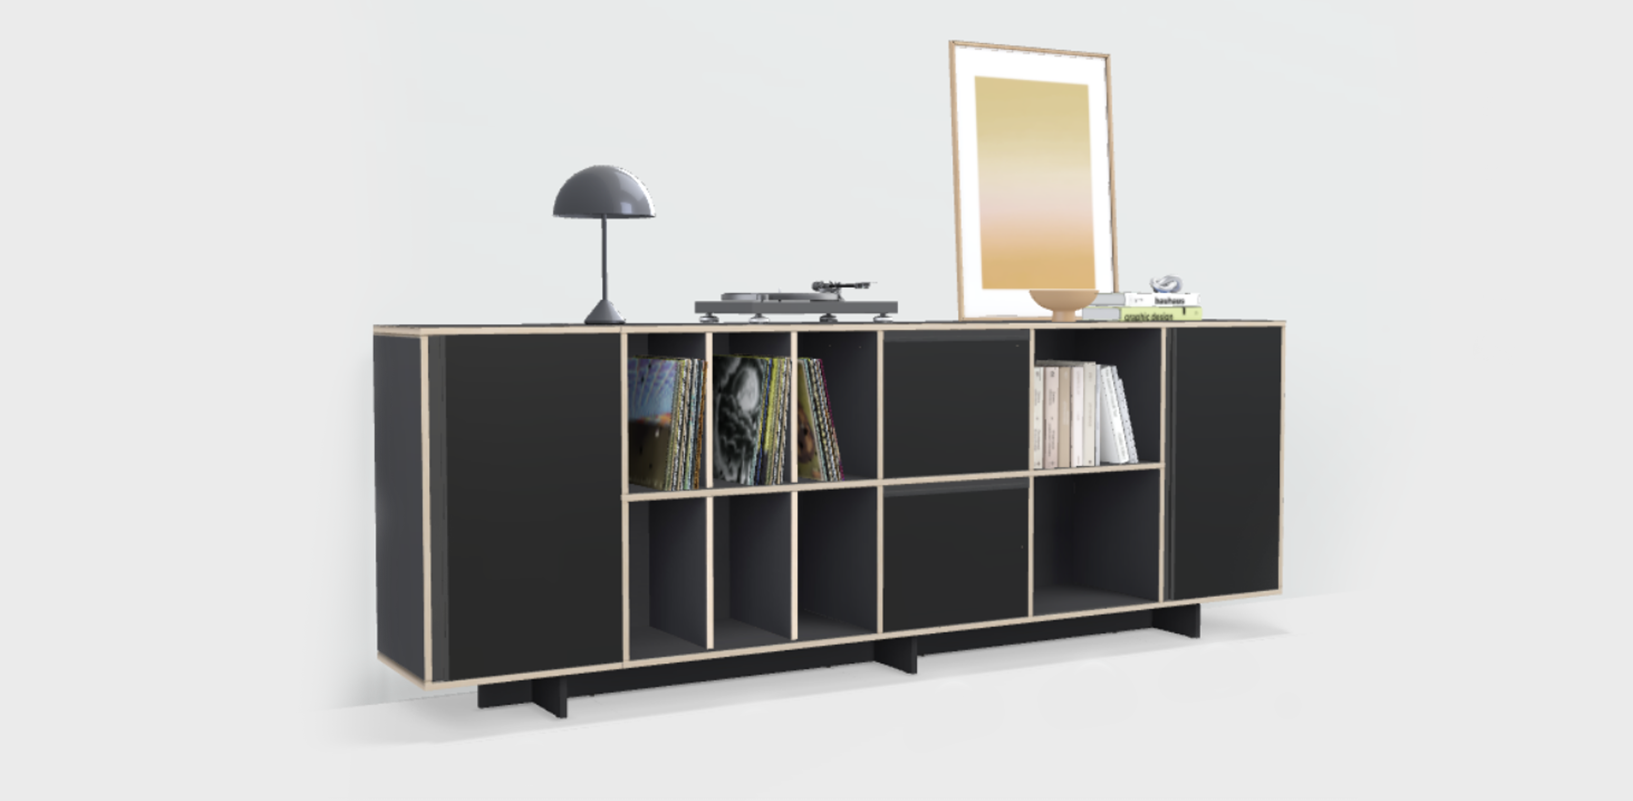 Sideboard in Black with Doors and Drawers